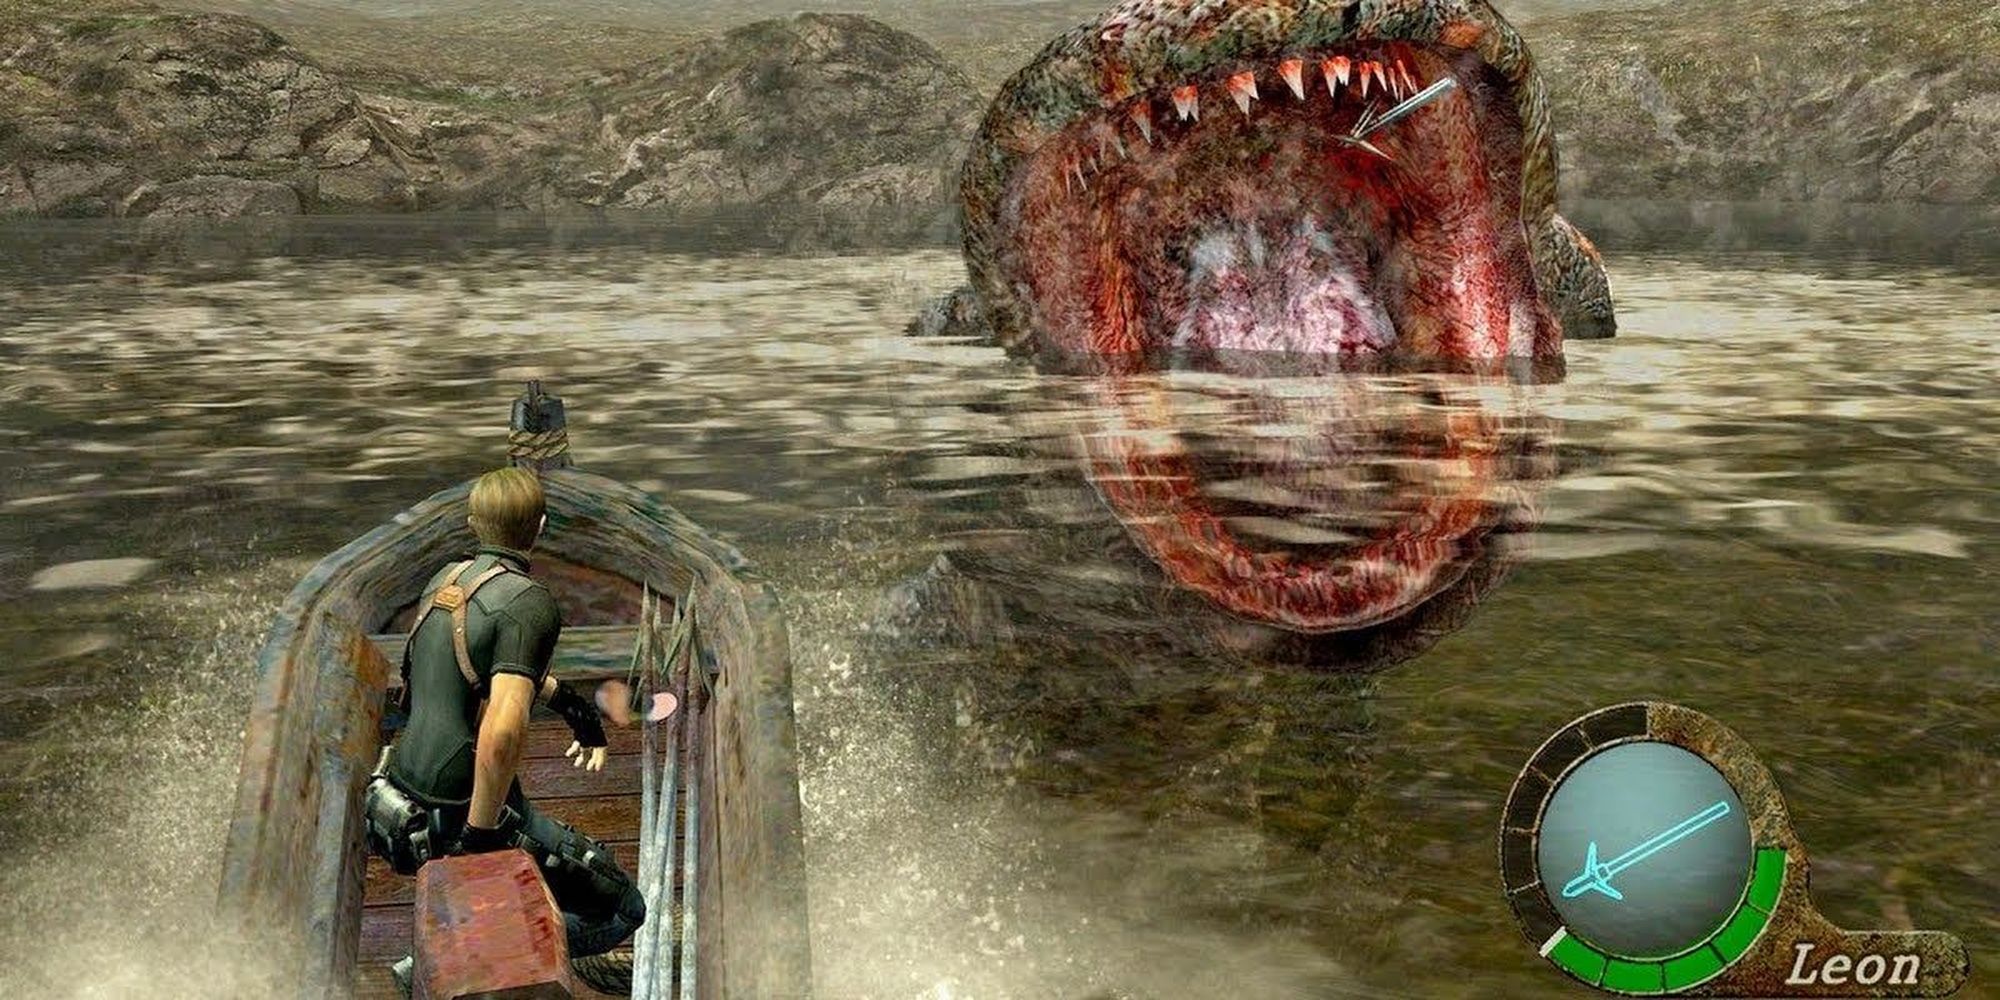 Resident Evil 4: Leon Fighting The Del Lago On A Boat